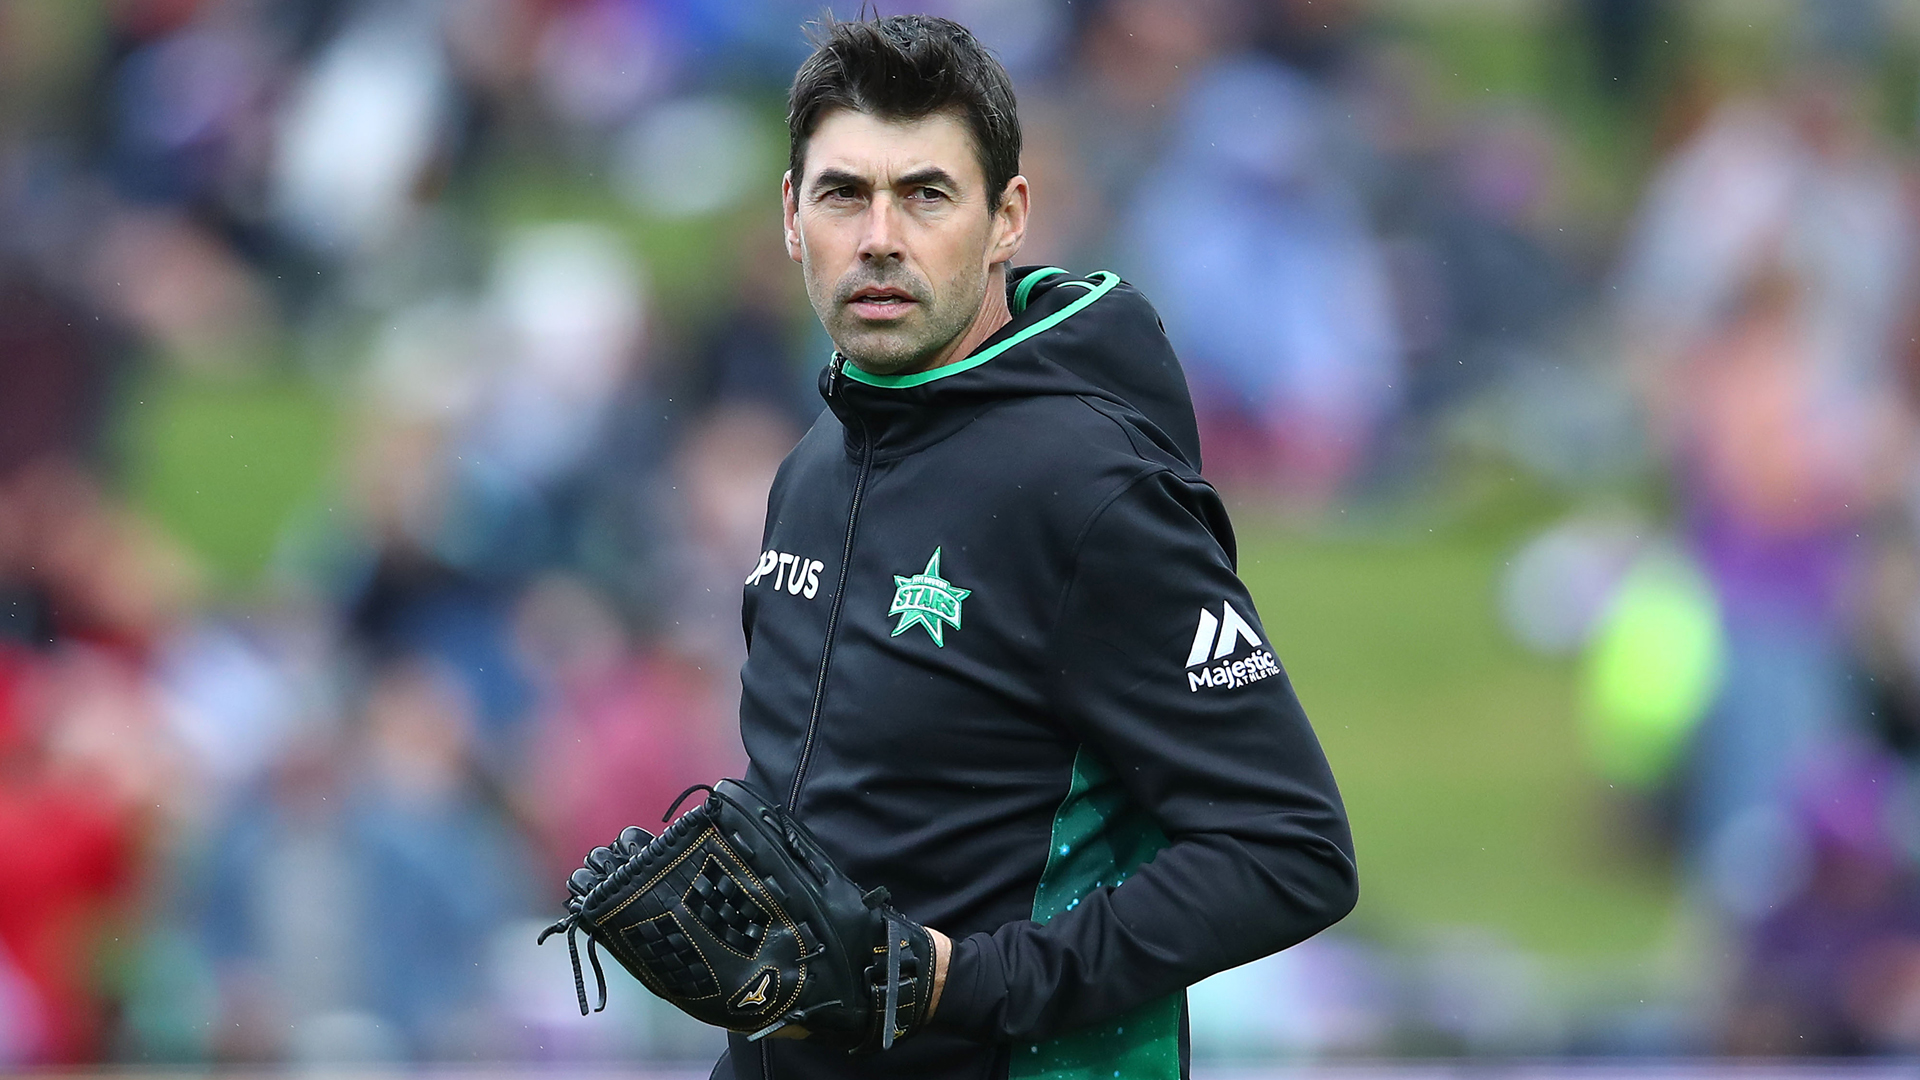 Melbourne Stars head coach Stephen Fleming decided not to seek a contract extension.